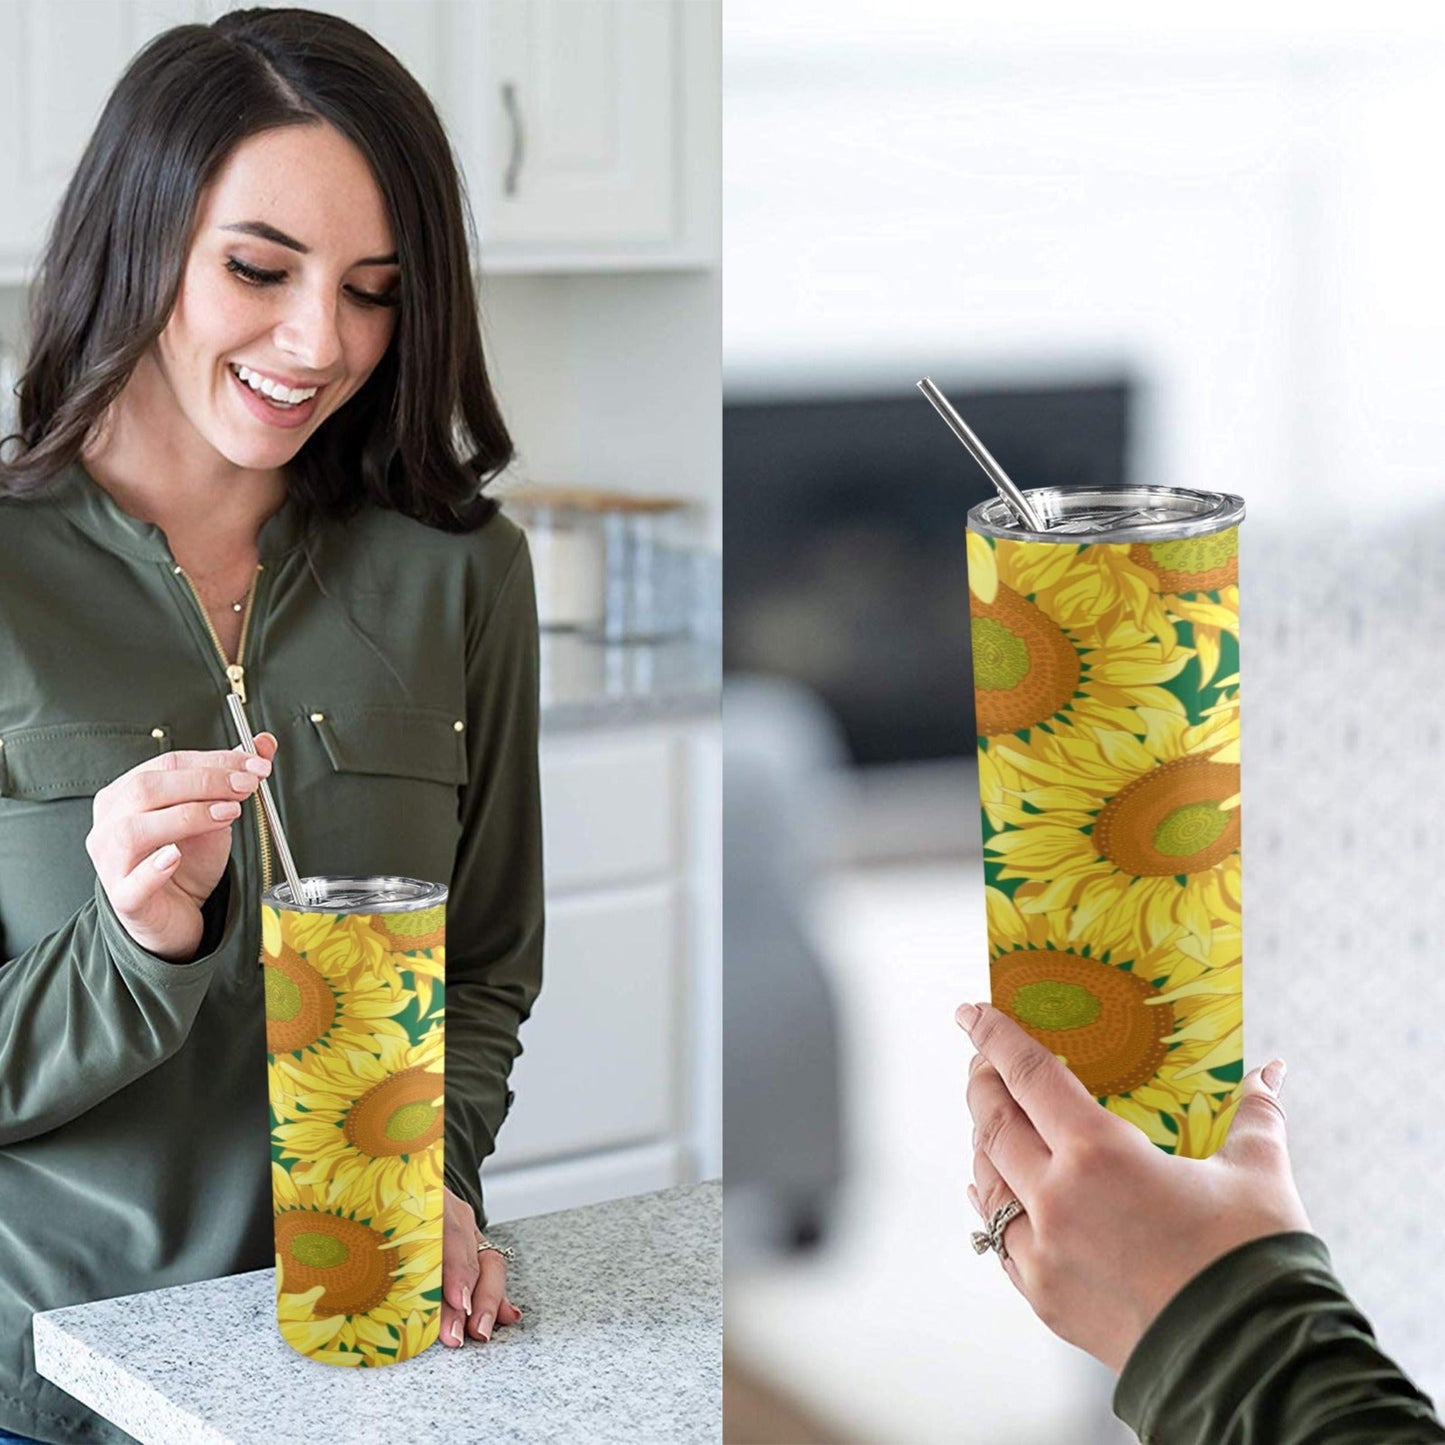 Sunflowers - 20oz Tall Skinny Tumbler with Lid and Straw 20oz Tall Skinny Tumbler with Lid and Straw